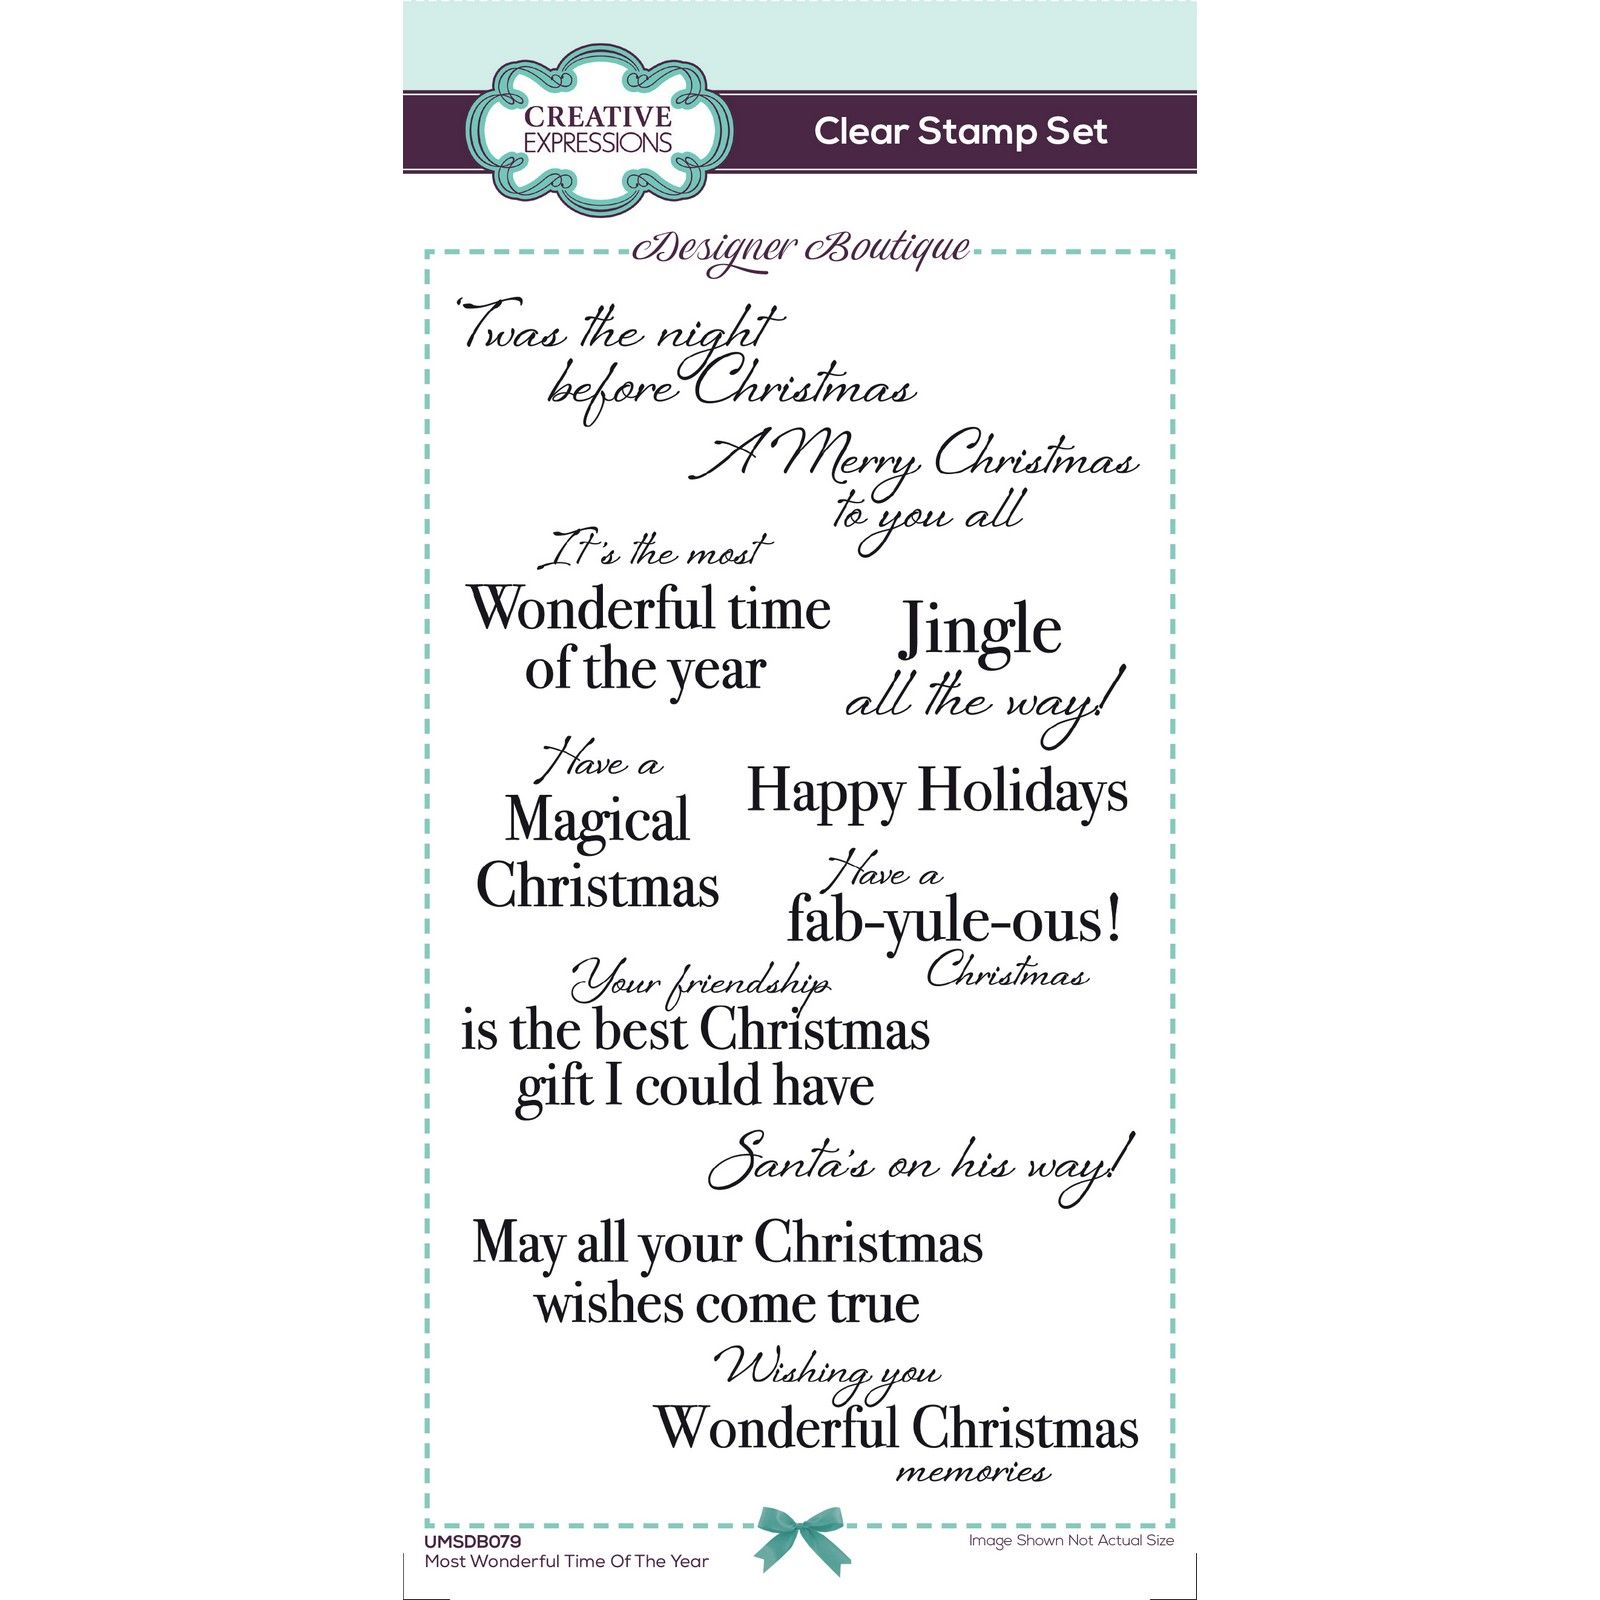 Creative Expressions • Designer boutique collection Clear stamp Most wonderful time